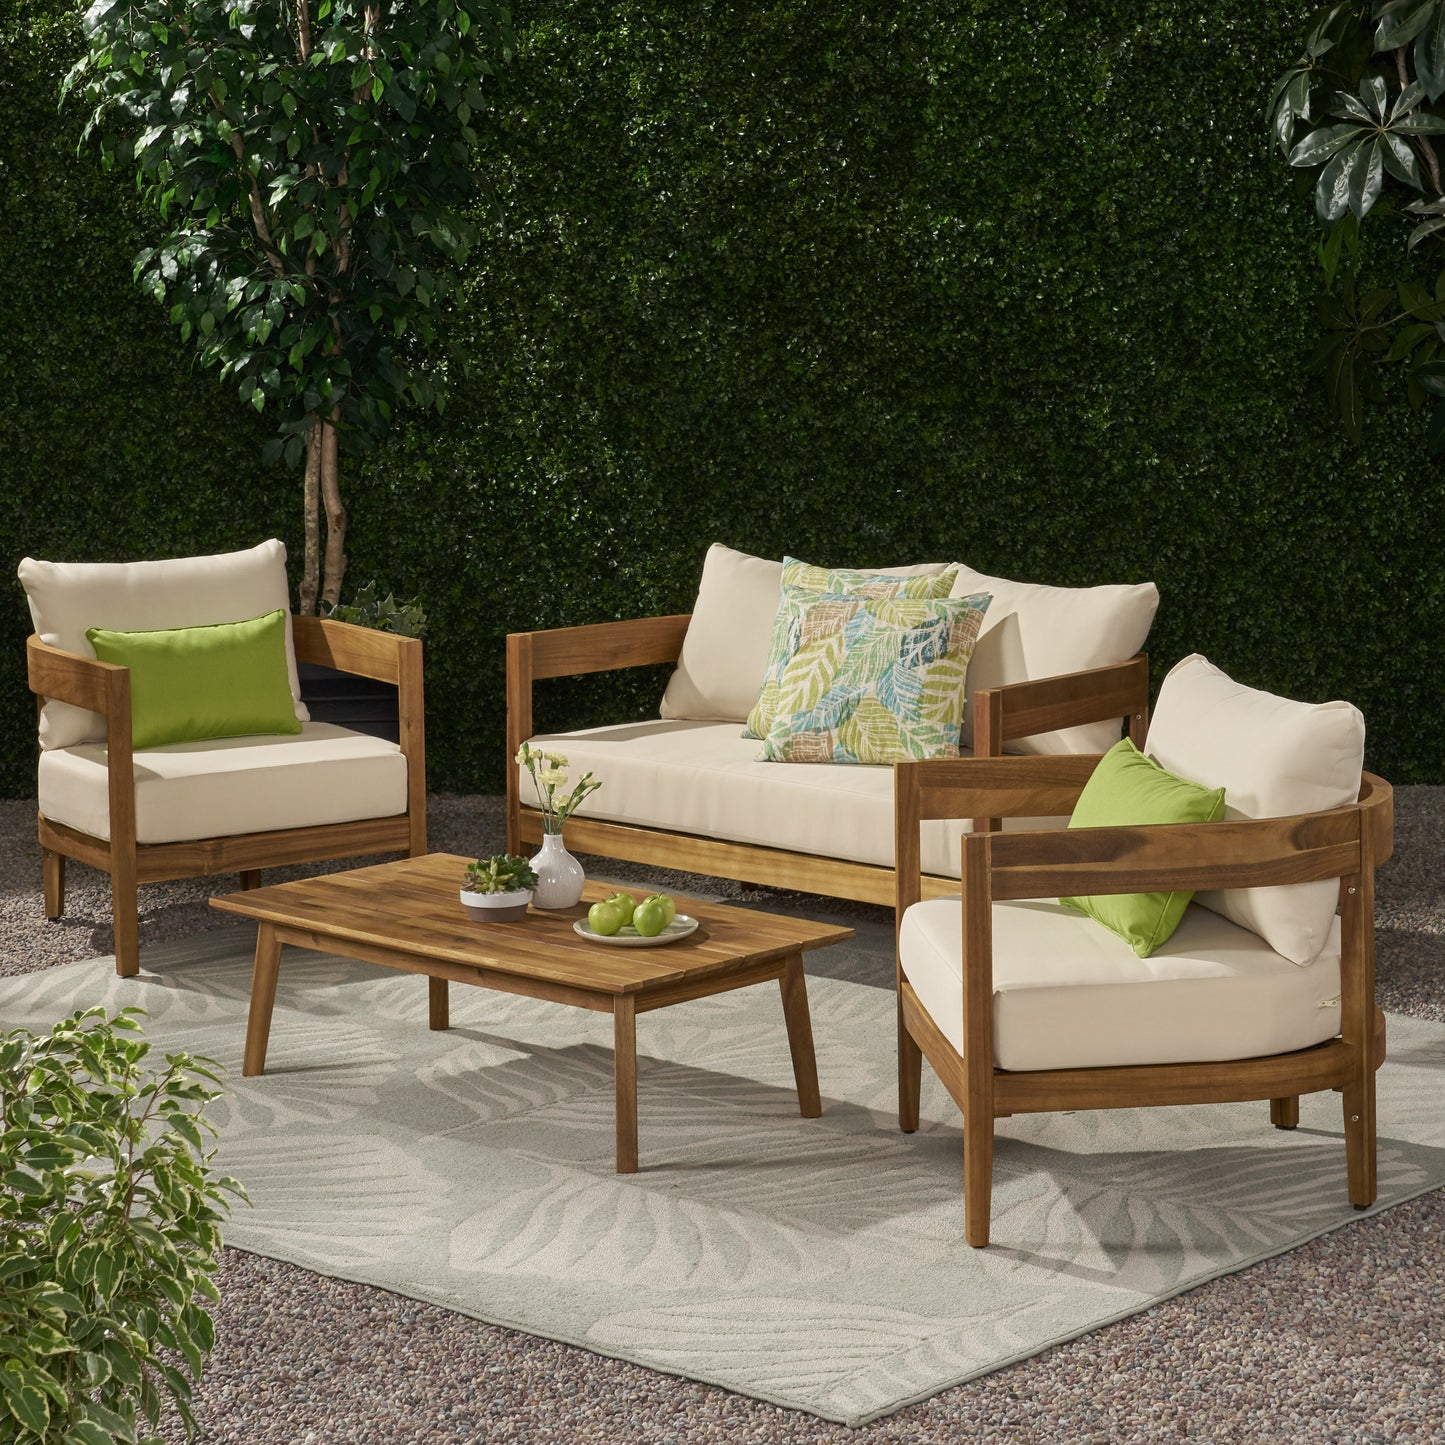 Burrough Outdoor Acacia Wood 4 Seater Chat Set with Cushions